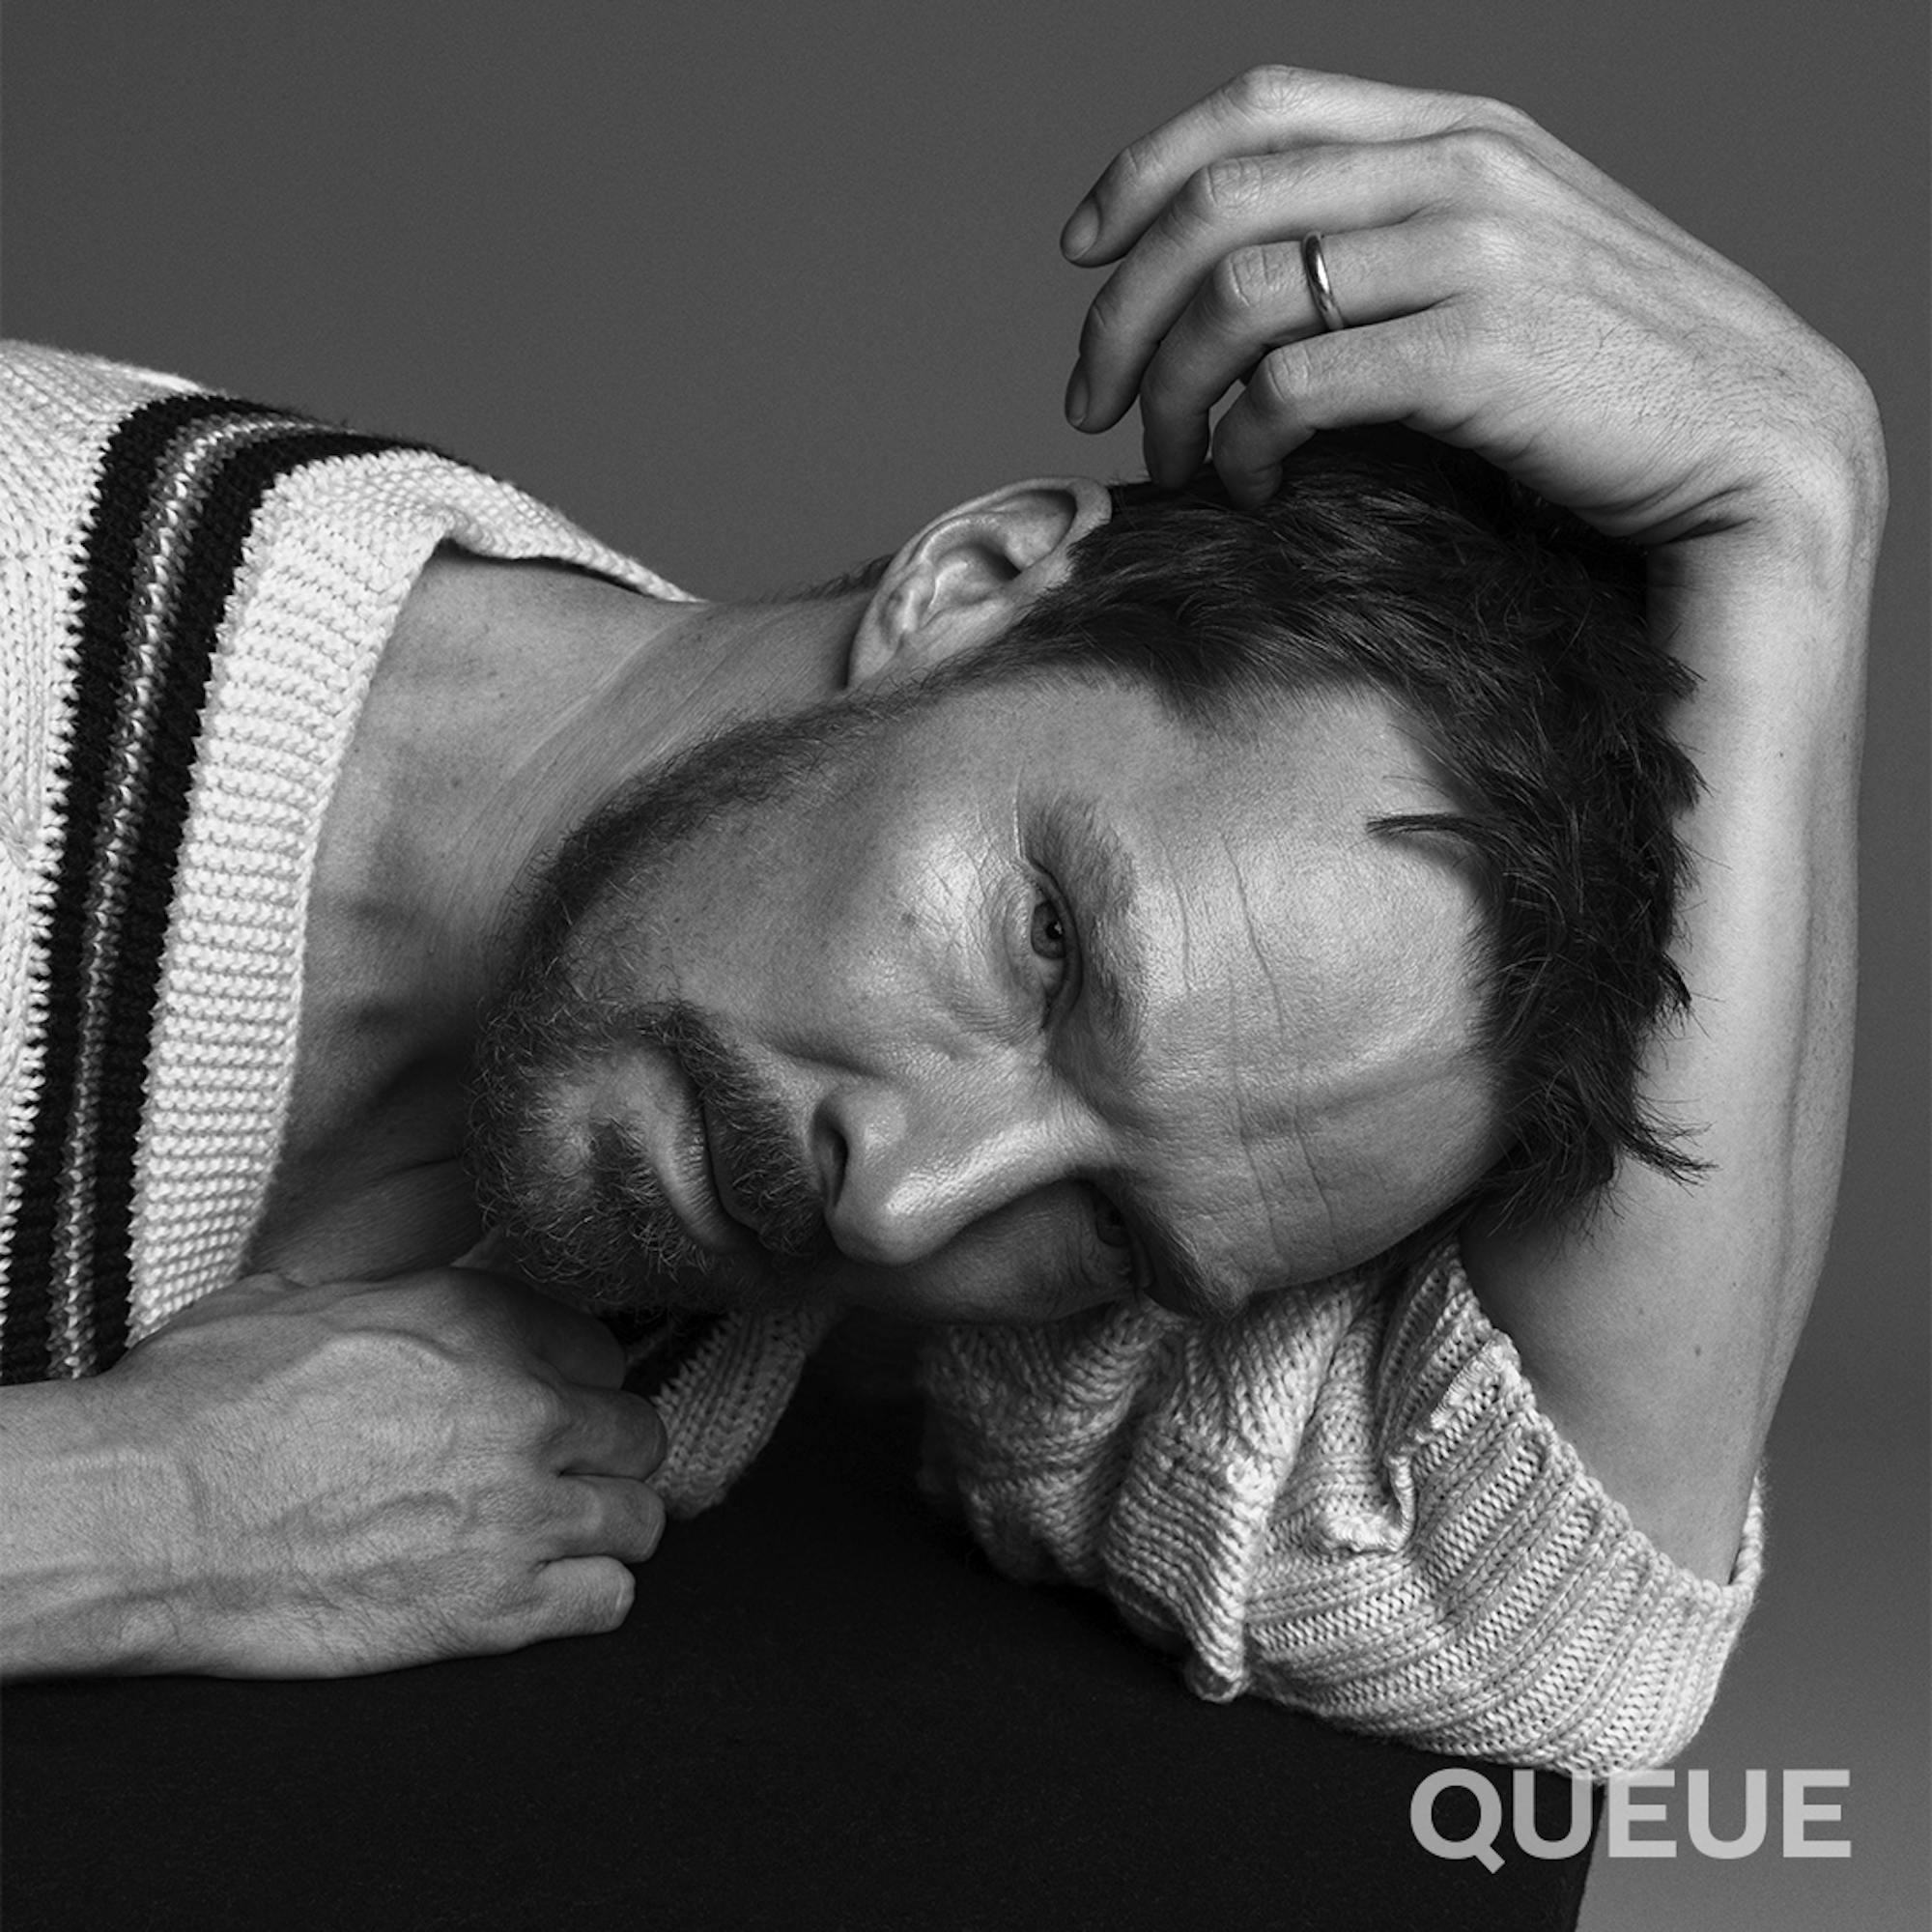 Benedict Cumberbatch wears a white cable knit sweater and rests his head in the crook of his arm. 